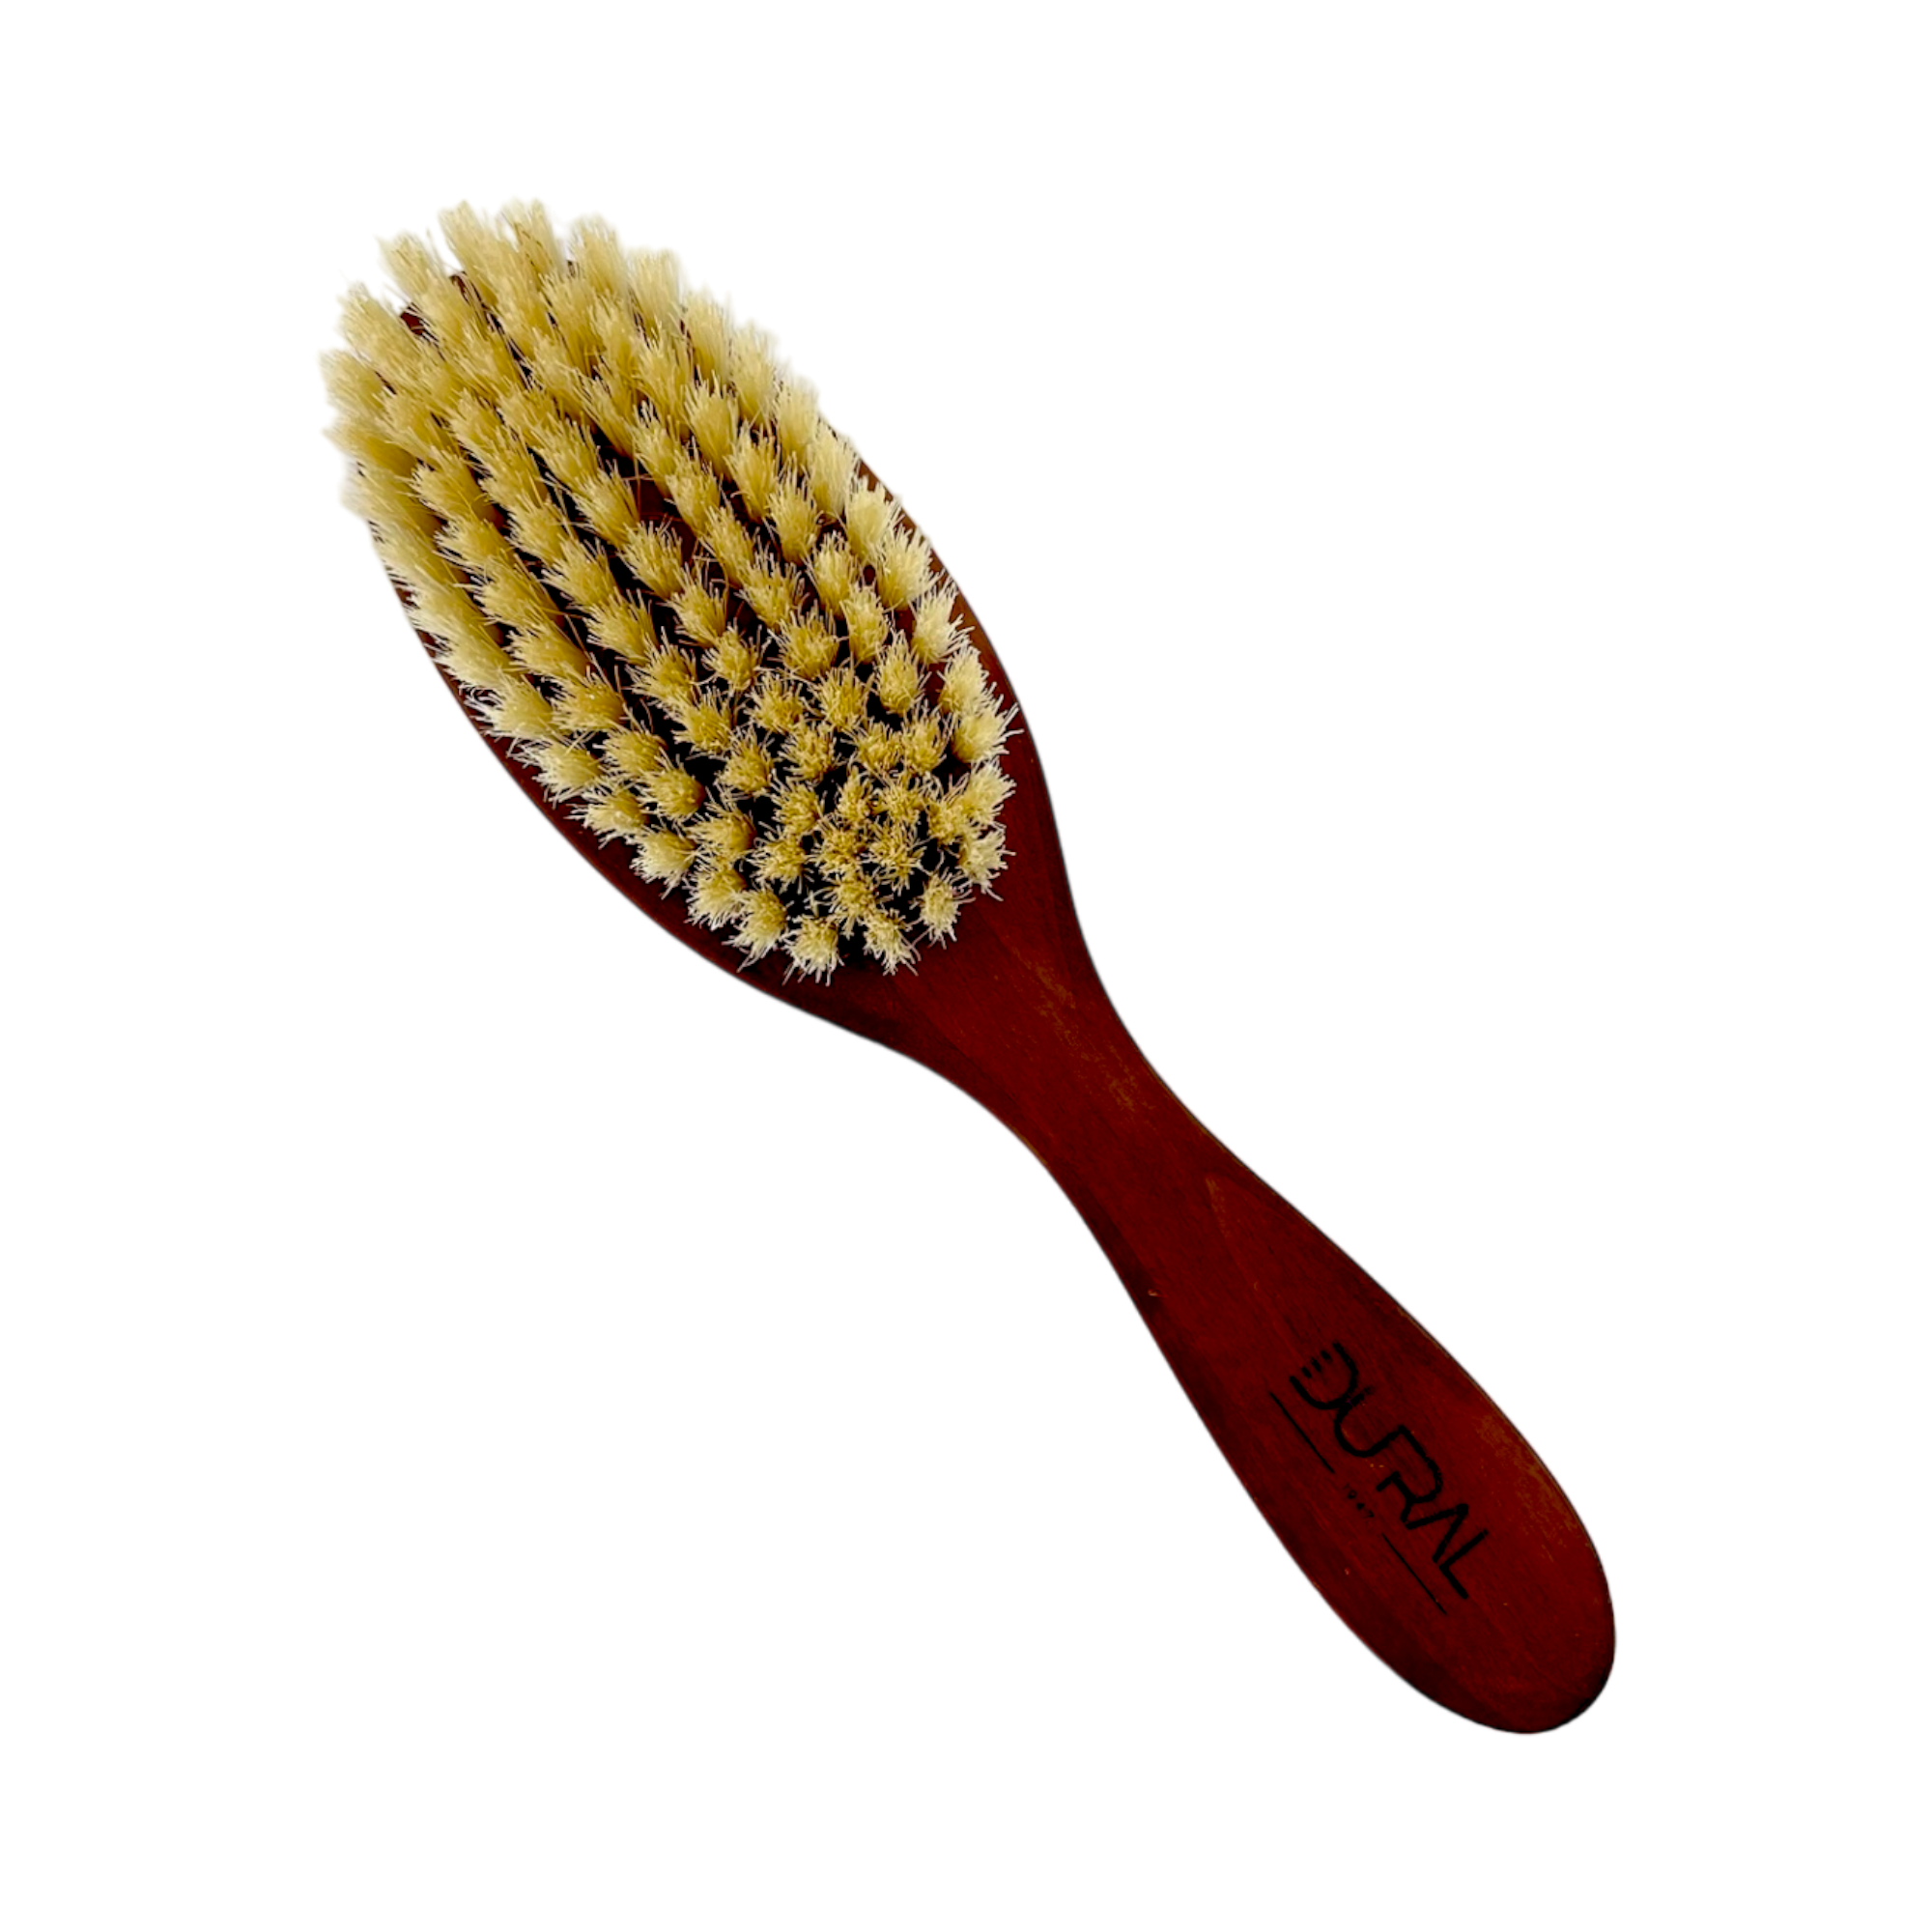 Dural Pear wood baby brush with light boar bristles